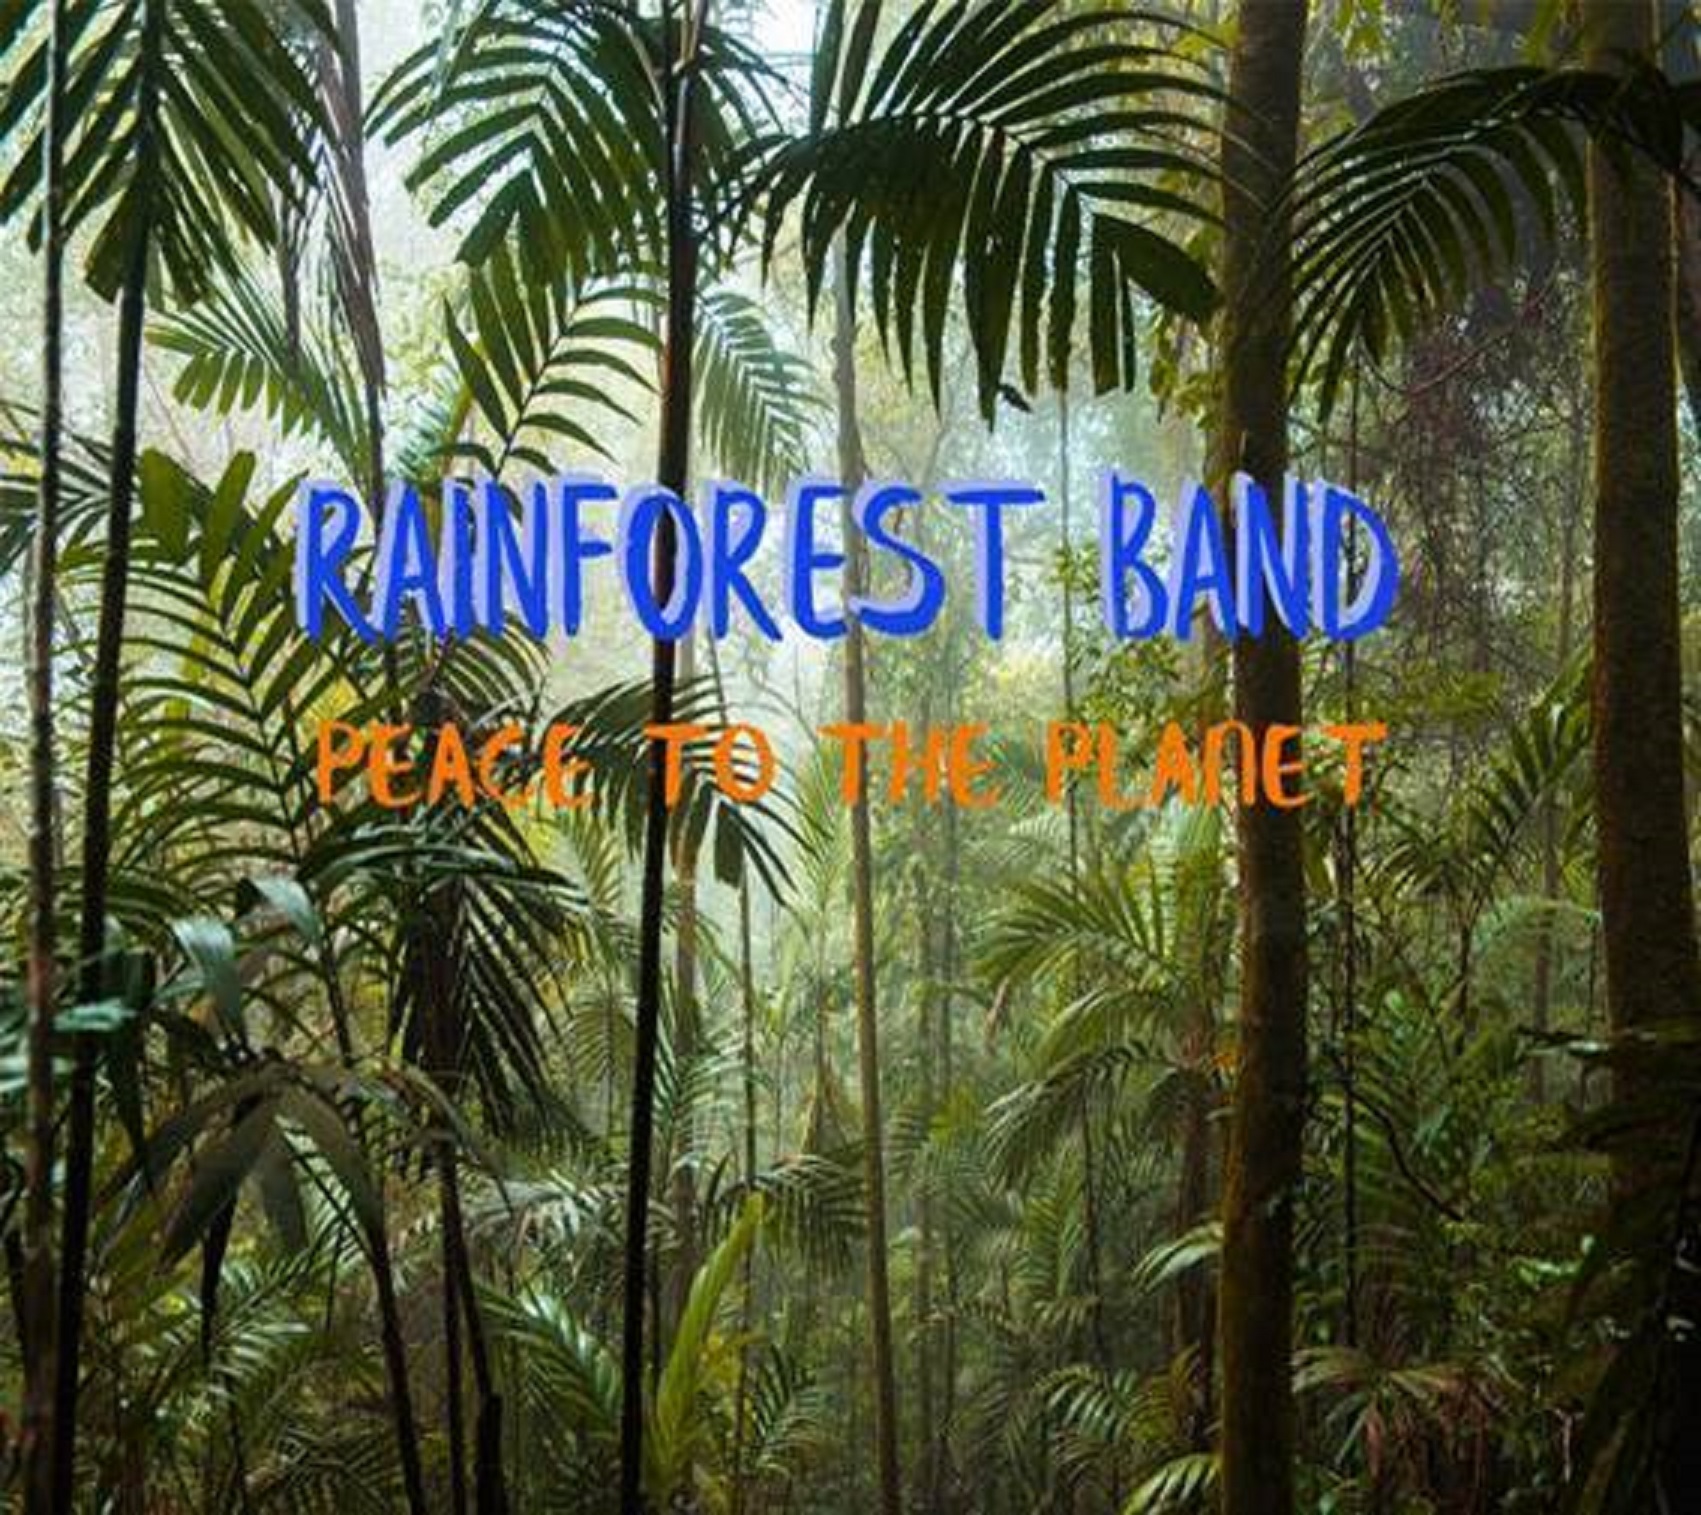 Rainforest Band delivers a timely album with a timeless message